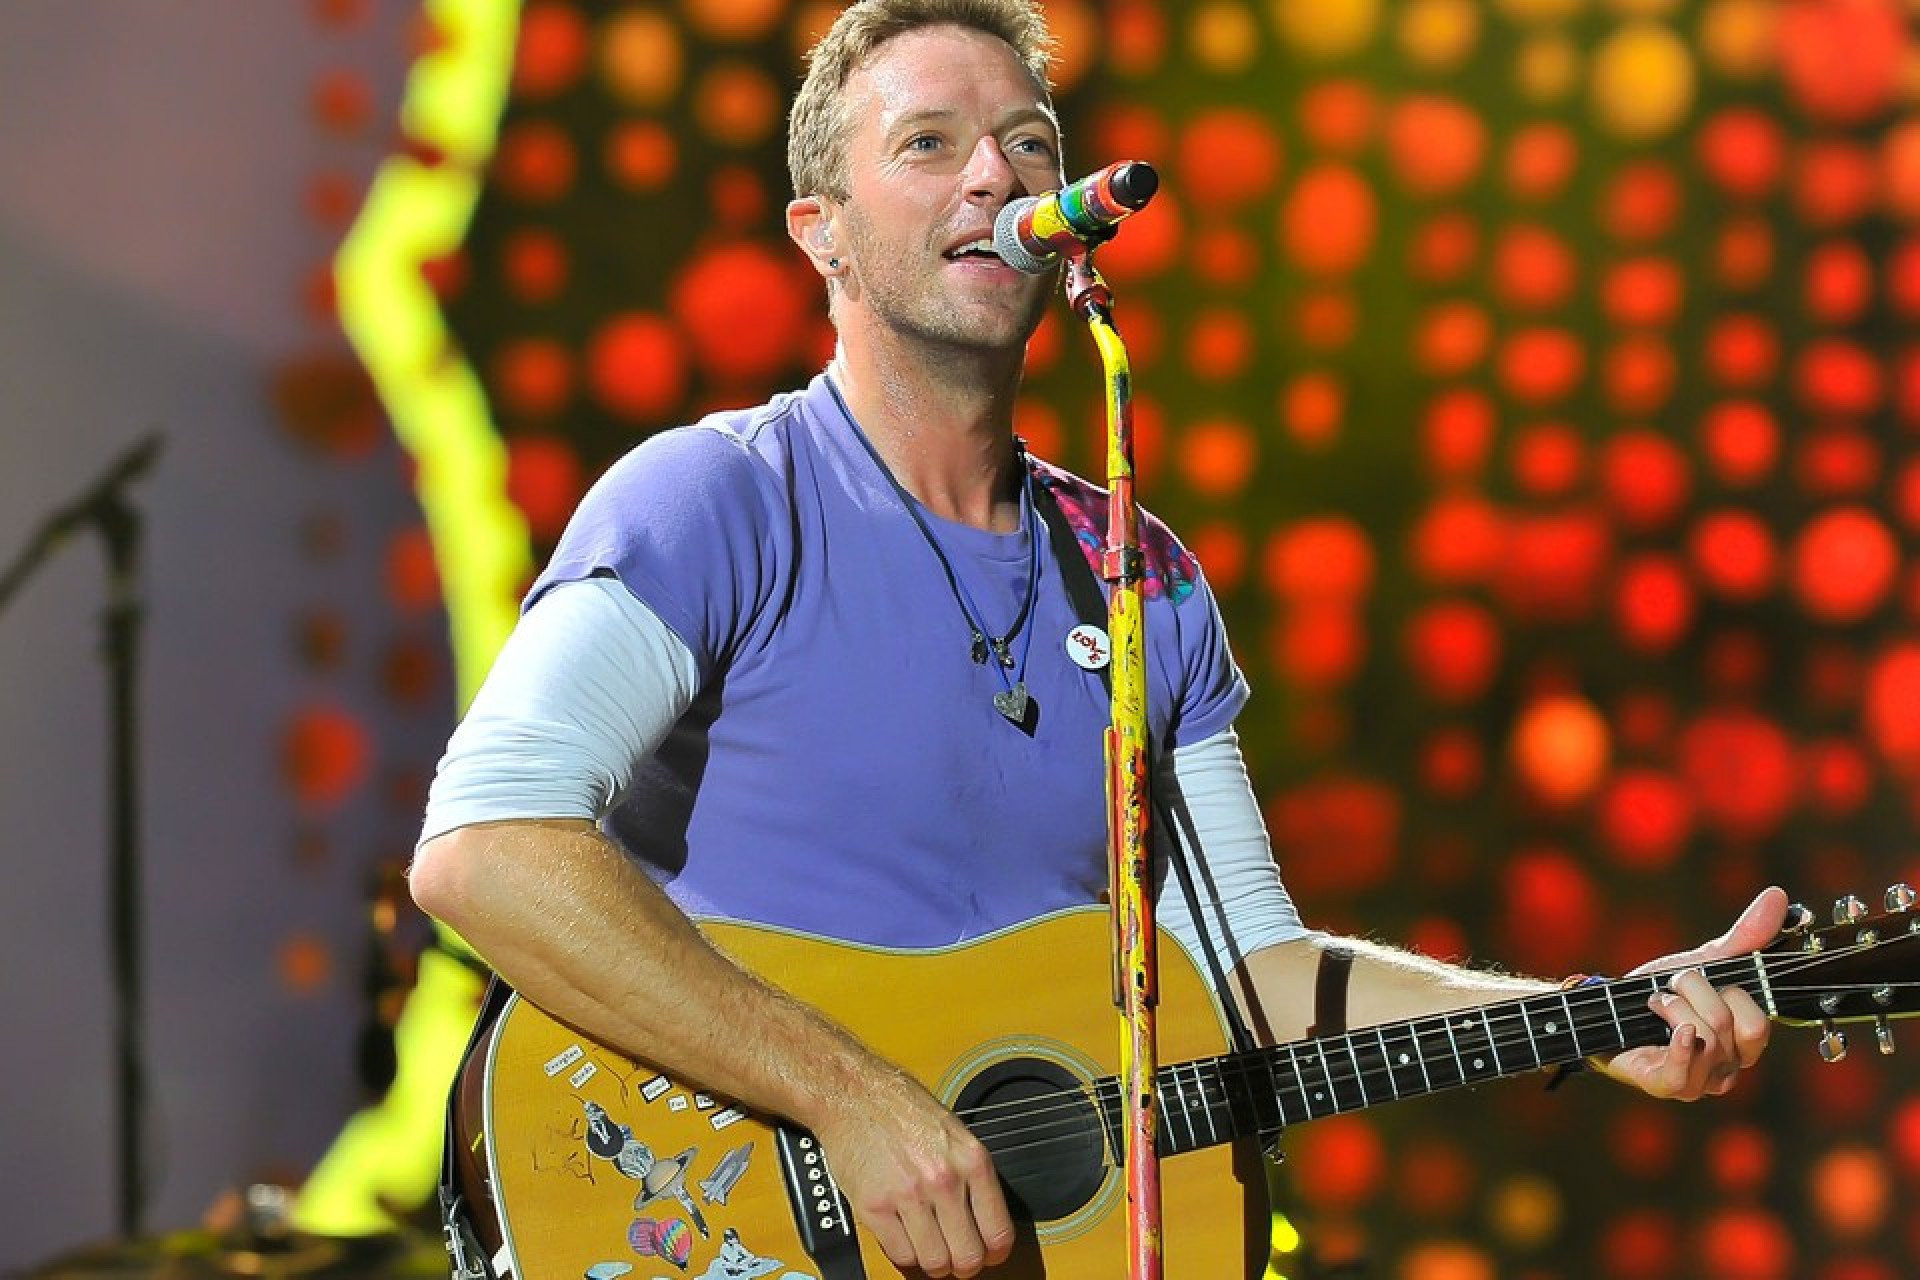 https___hk.hypebeast.com_files_2021_12_chris-martin-coldplay-stop-making-music-after-2025-announcement-0